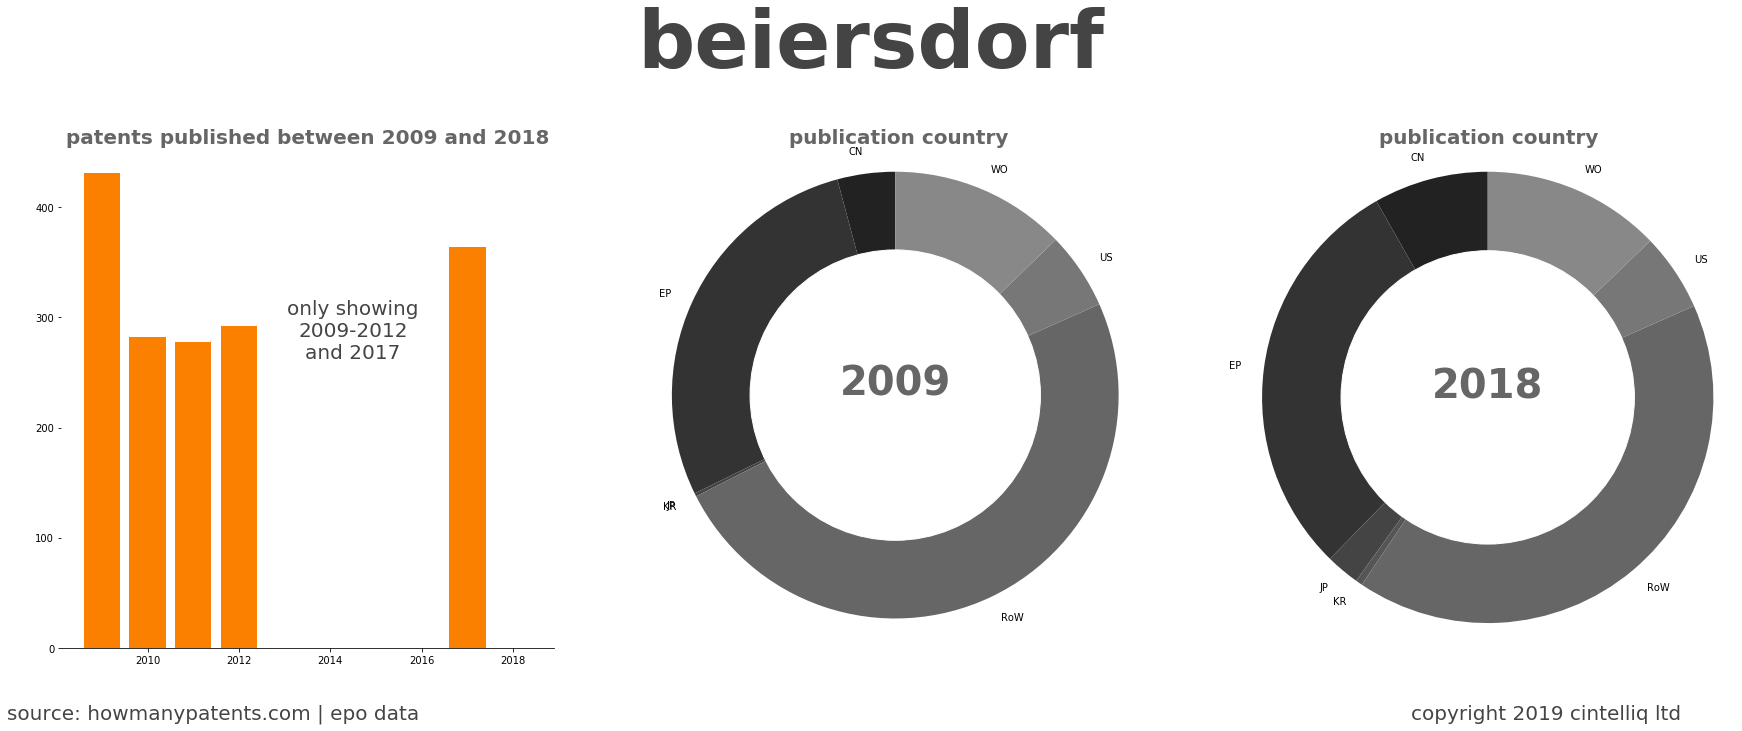 summary of patents for Beiersdorf